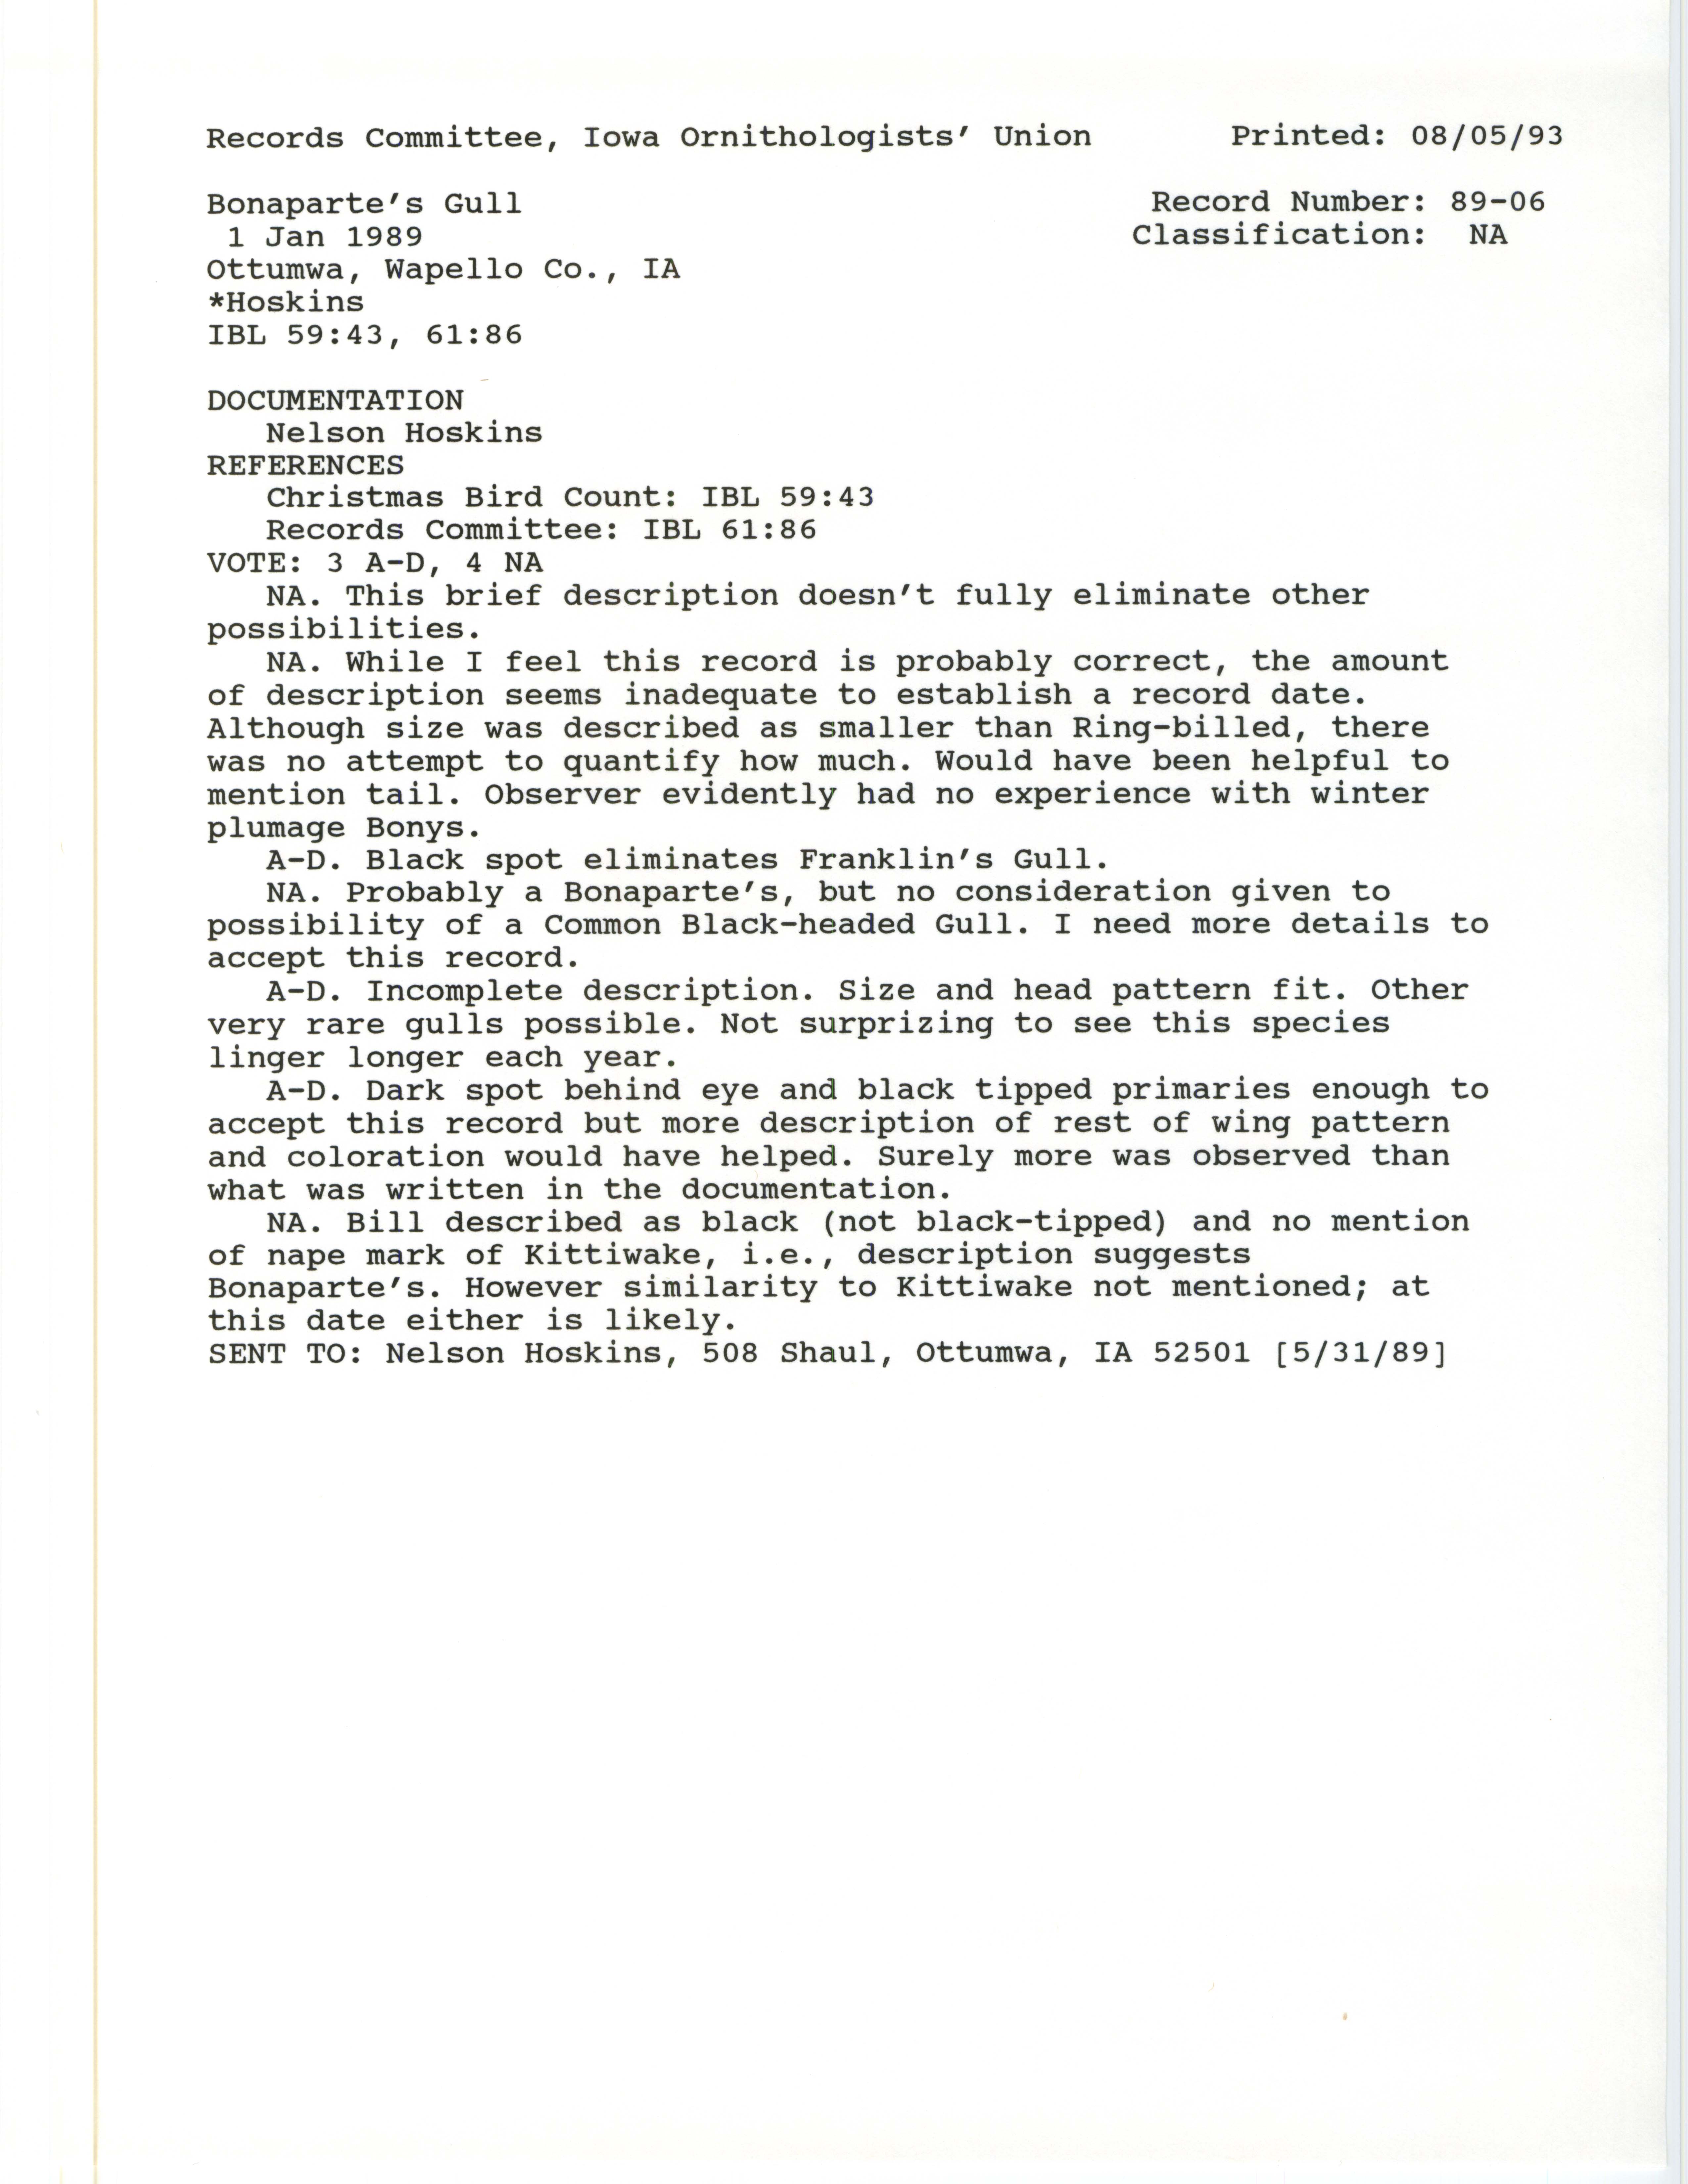 Records Committee review for rare bird sighting of Bonaparte's Gull at Ottumwa, 1989